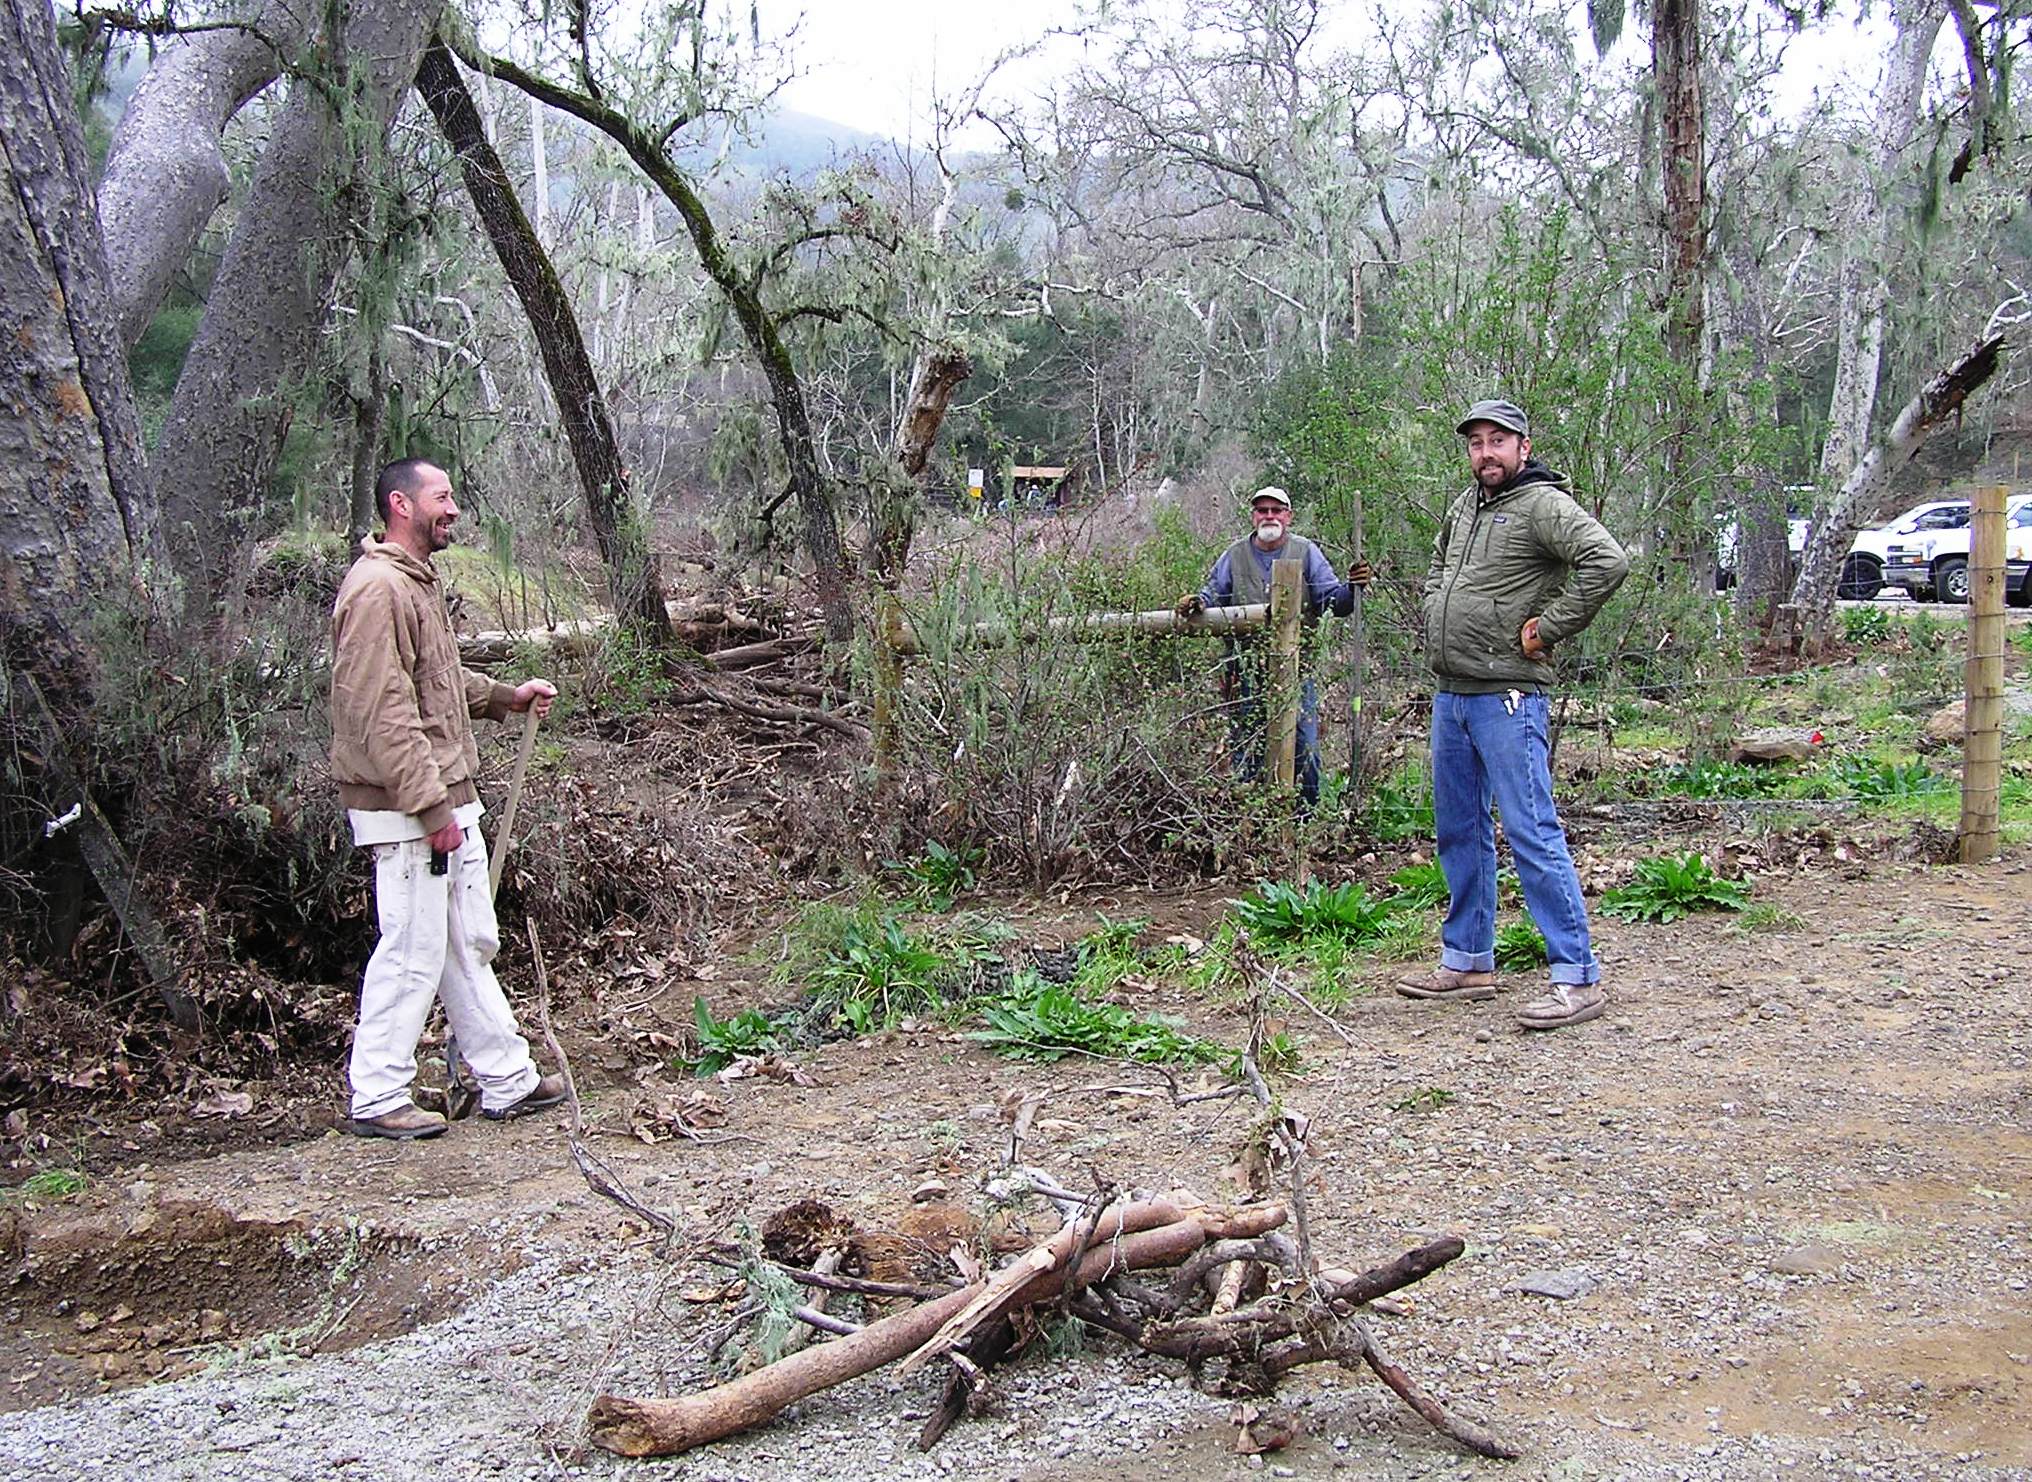 Debris cleanup at the entrance to the trailhead.